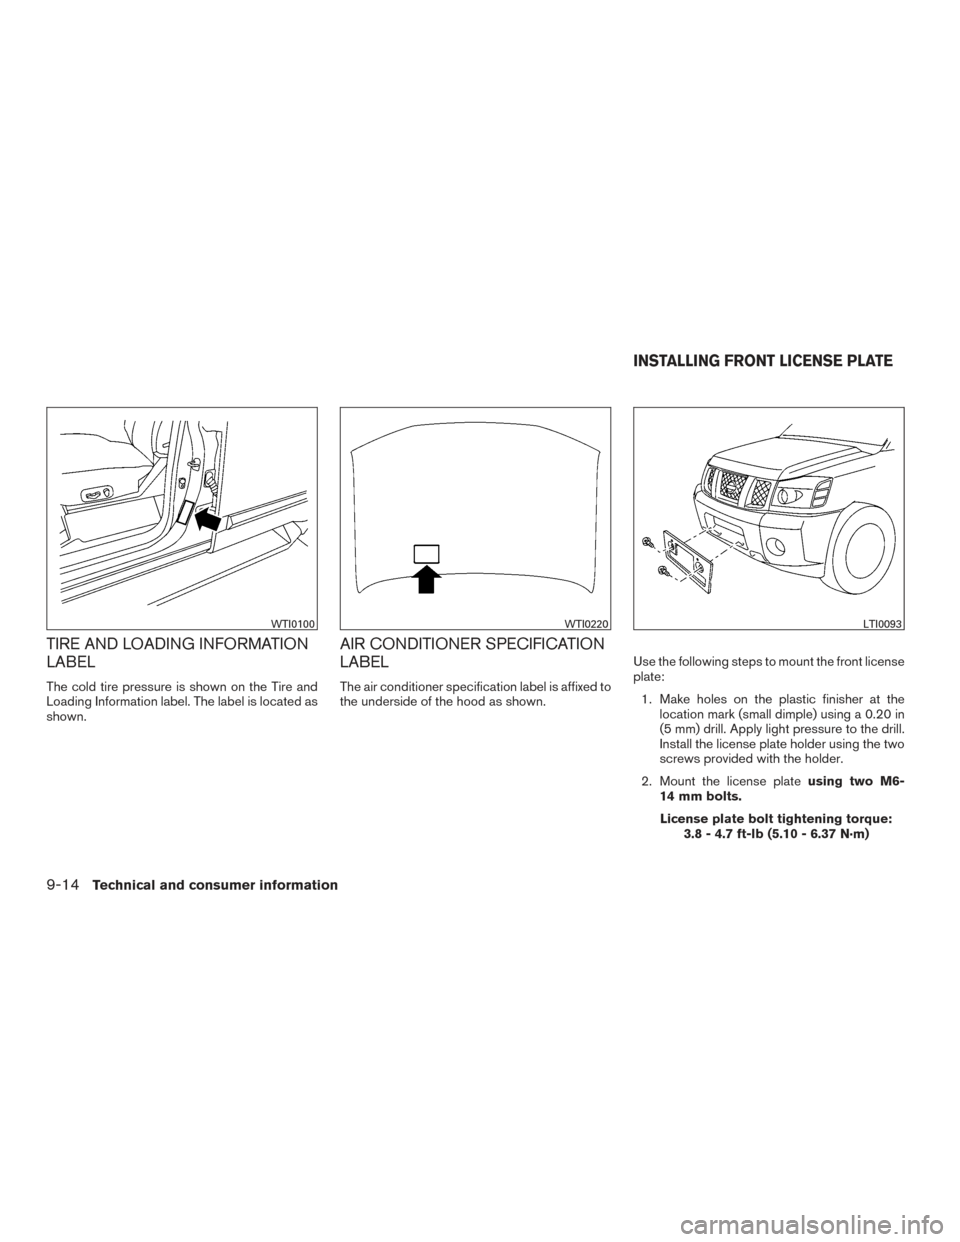 NISSAN TITAN 2015 1.G Owners Manual TIRE AND LOADING INFORMATION
LABEL
The cold tire pressure is shown on the Tire and
Loading Information label. The label is located as
shown.
AIR CONDITIONER SPECIFICATION
LABEL
The air conditioner spe